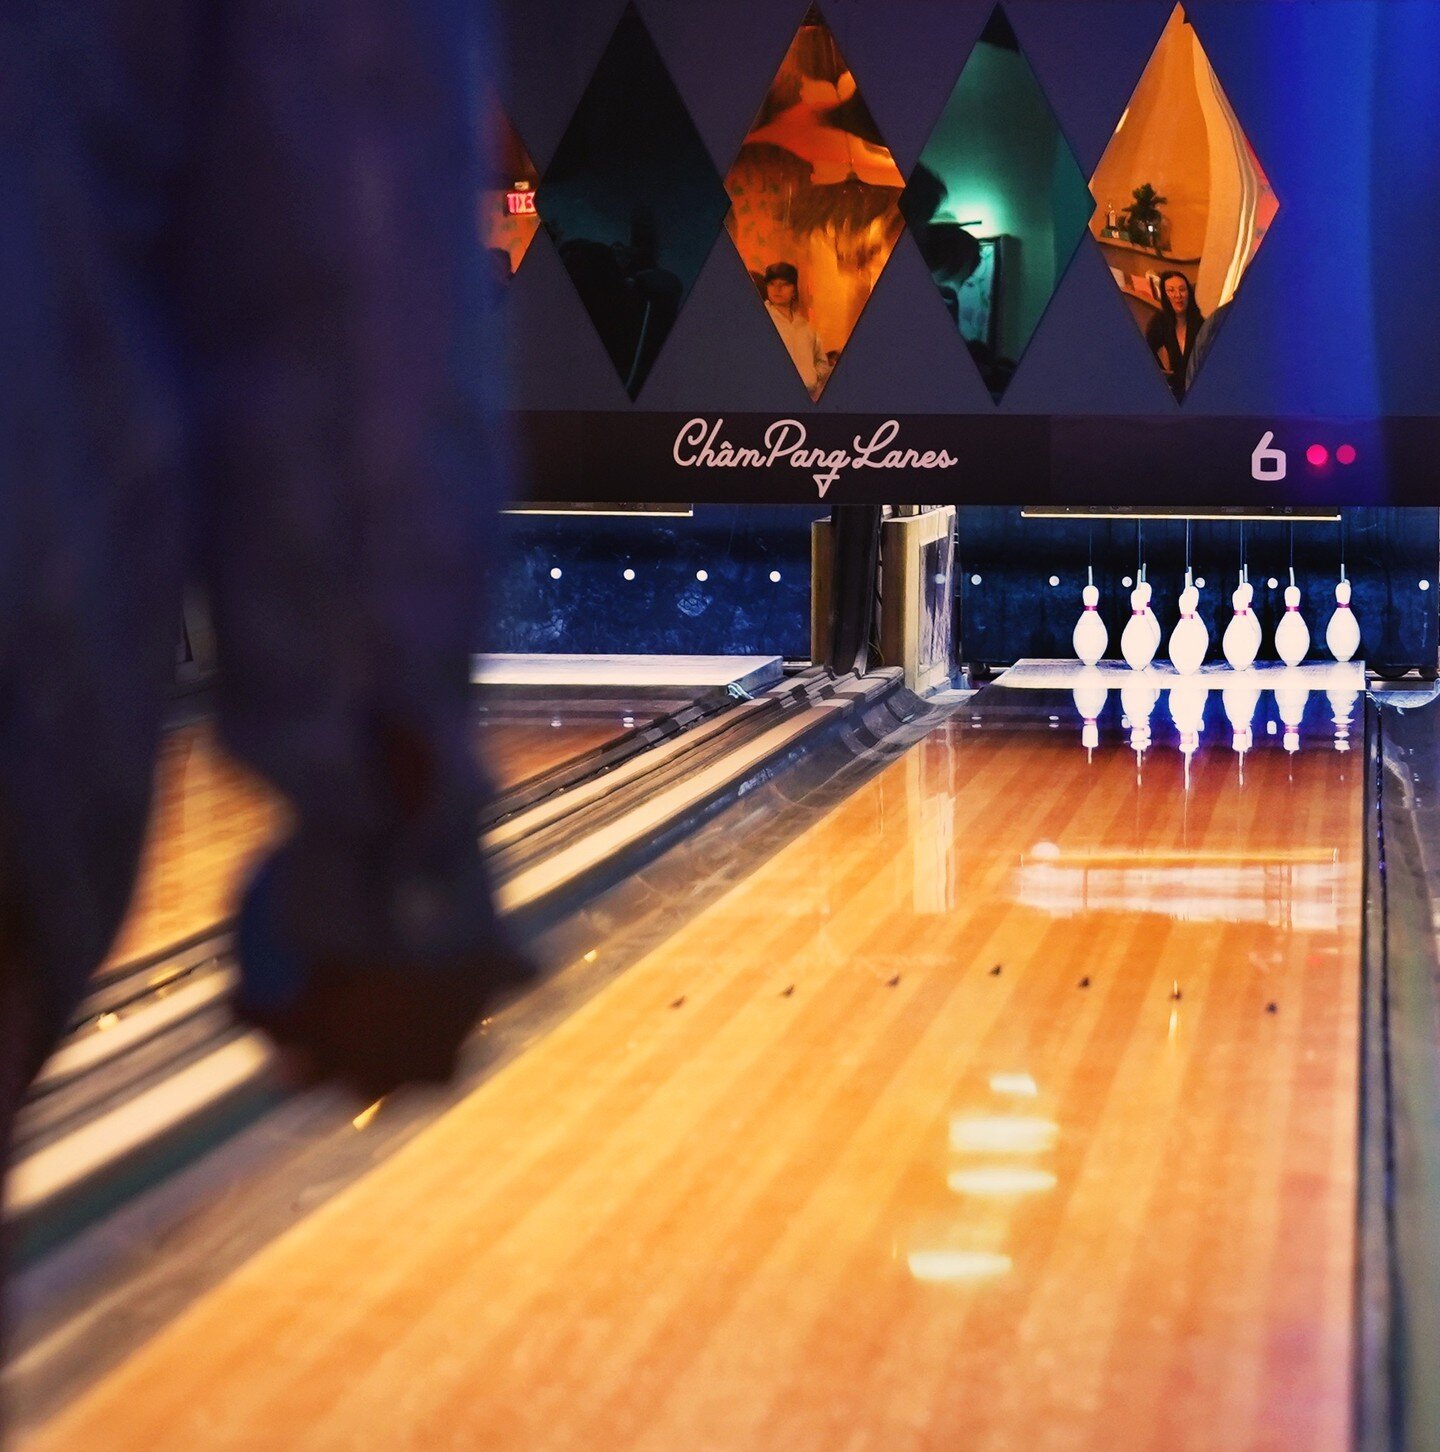 This post is for industry people and for industry people only, if you're not industry people, keep scrolling.

Monday Bowling Nights for industry peeps - every Monday from 8pm-12am.